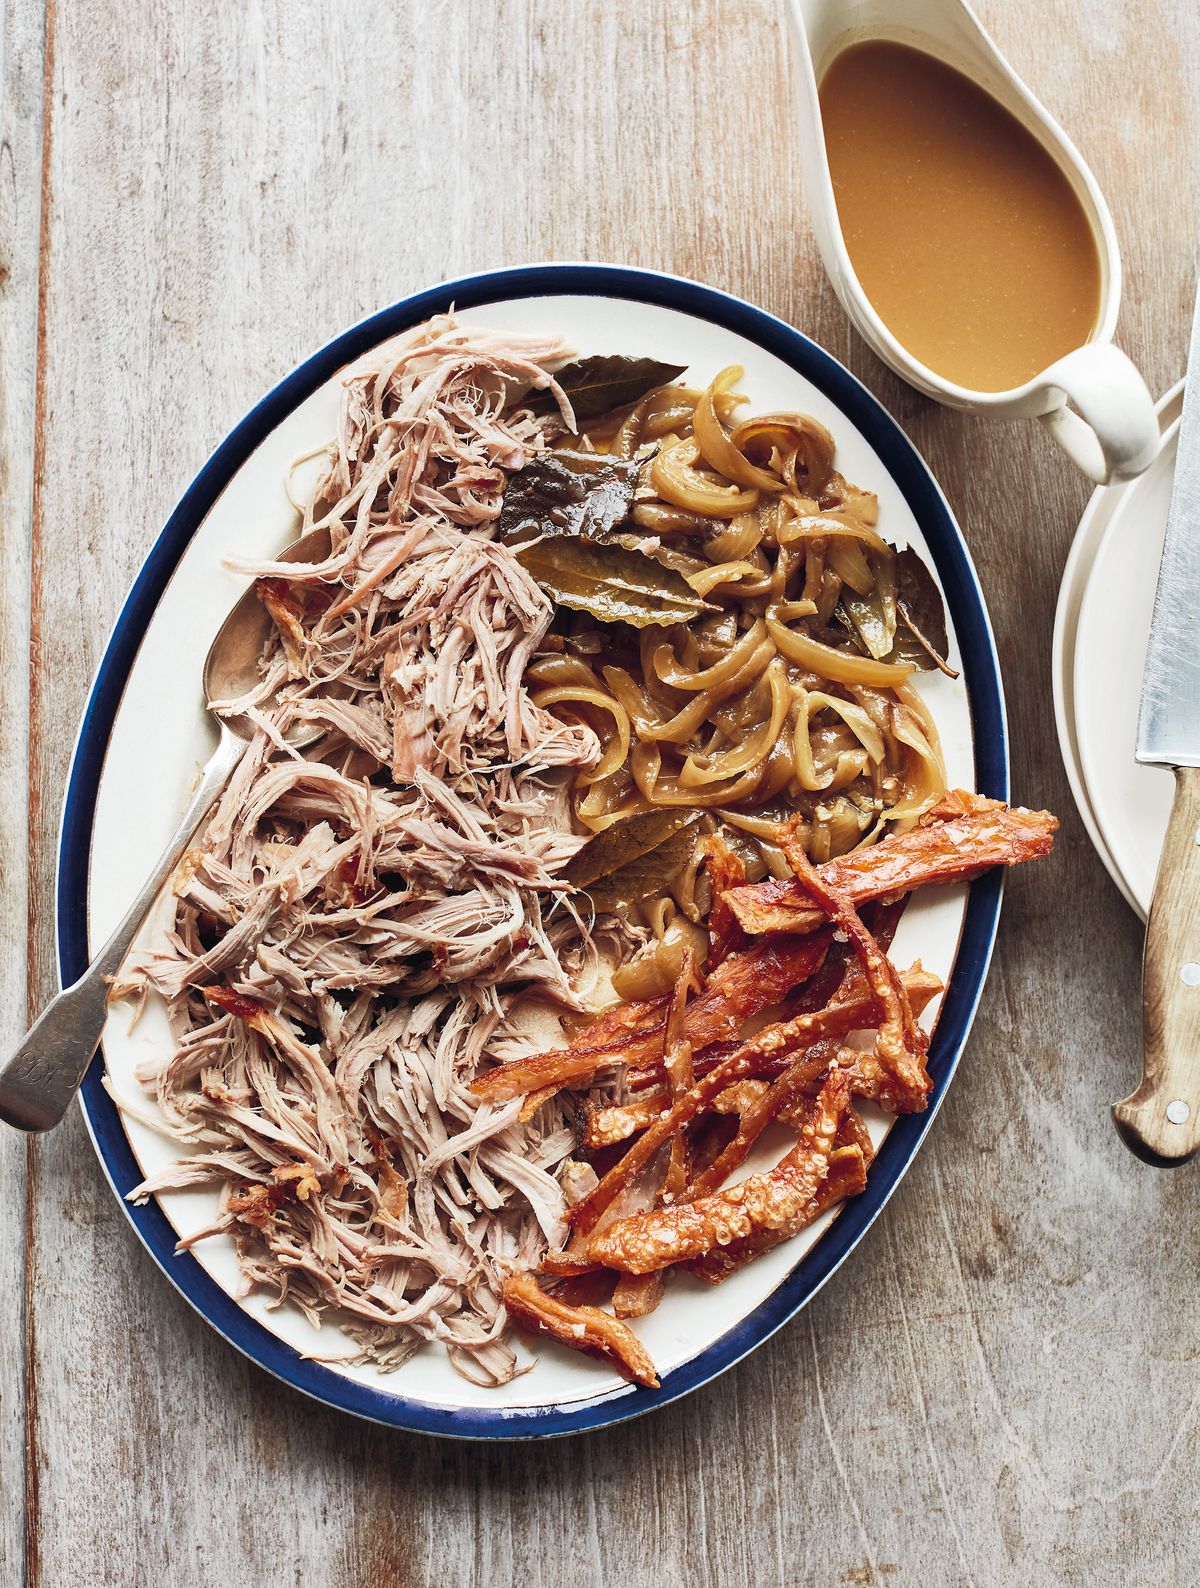 Mary Berry’s Slow-roast Hand and Spring with Crackling and Onion Gravy